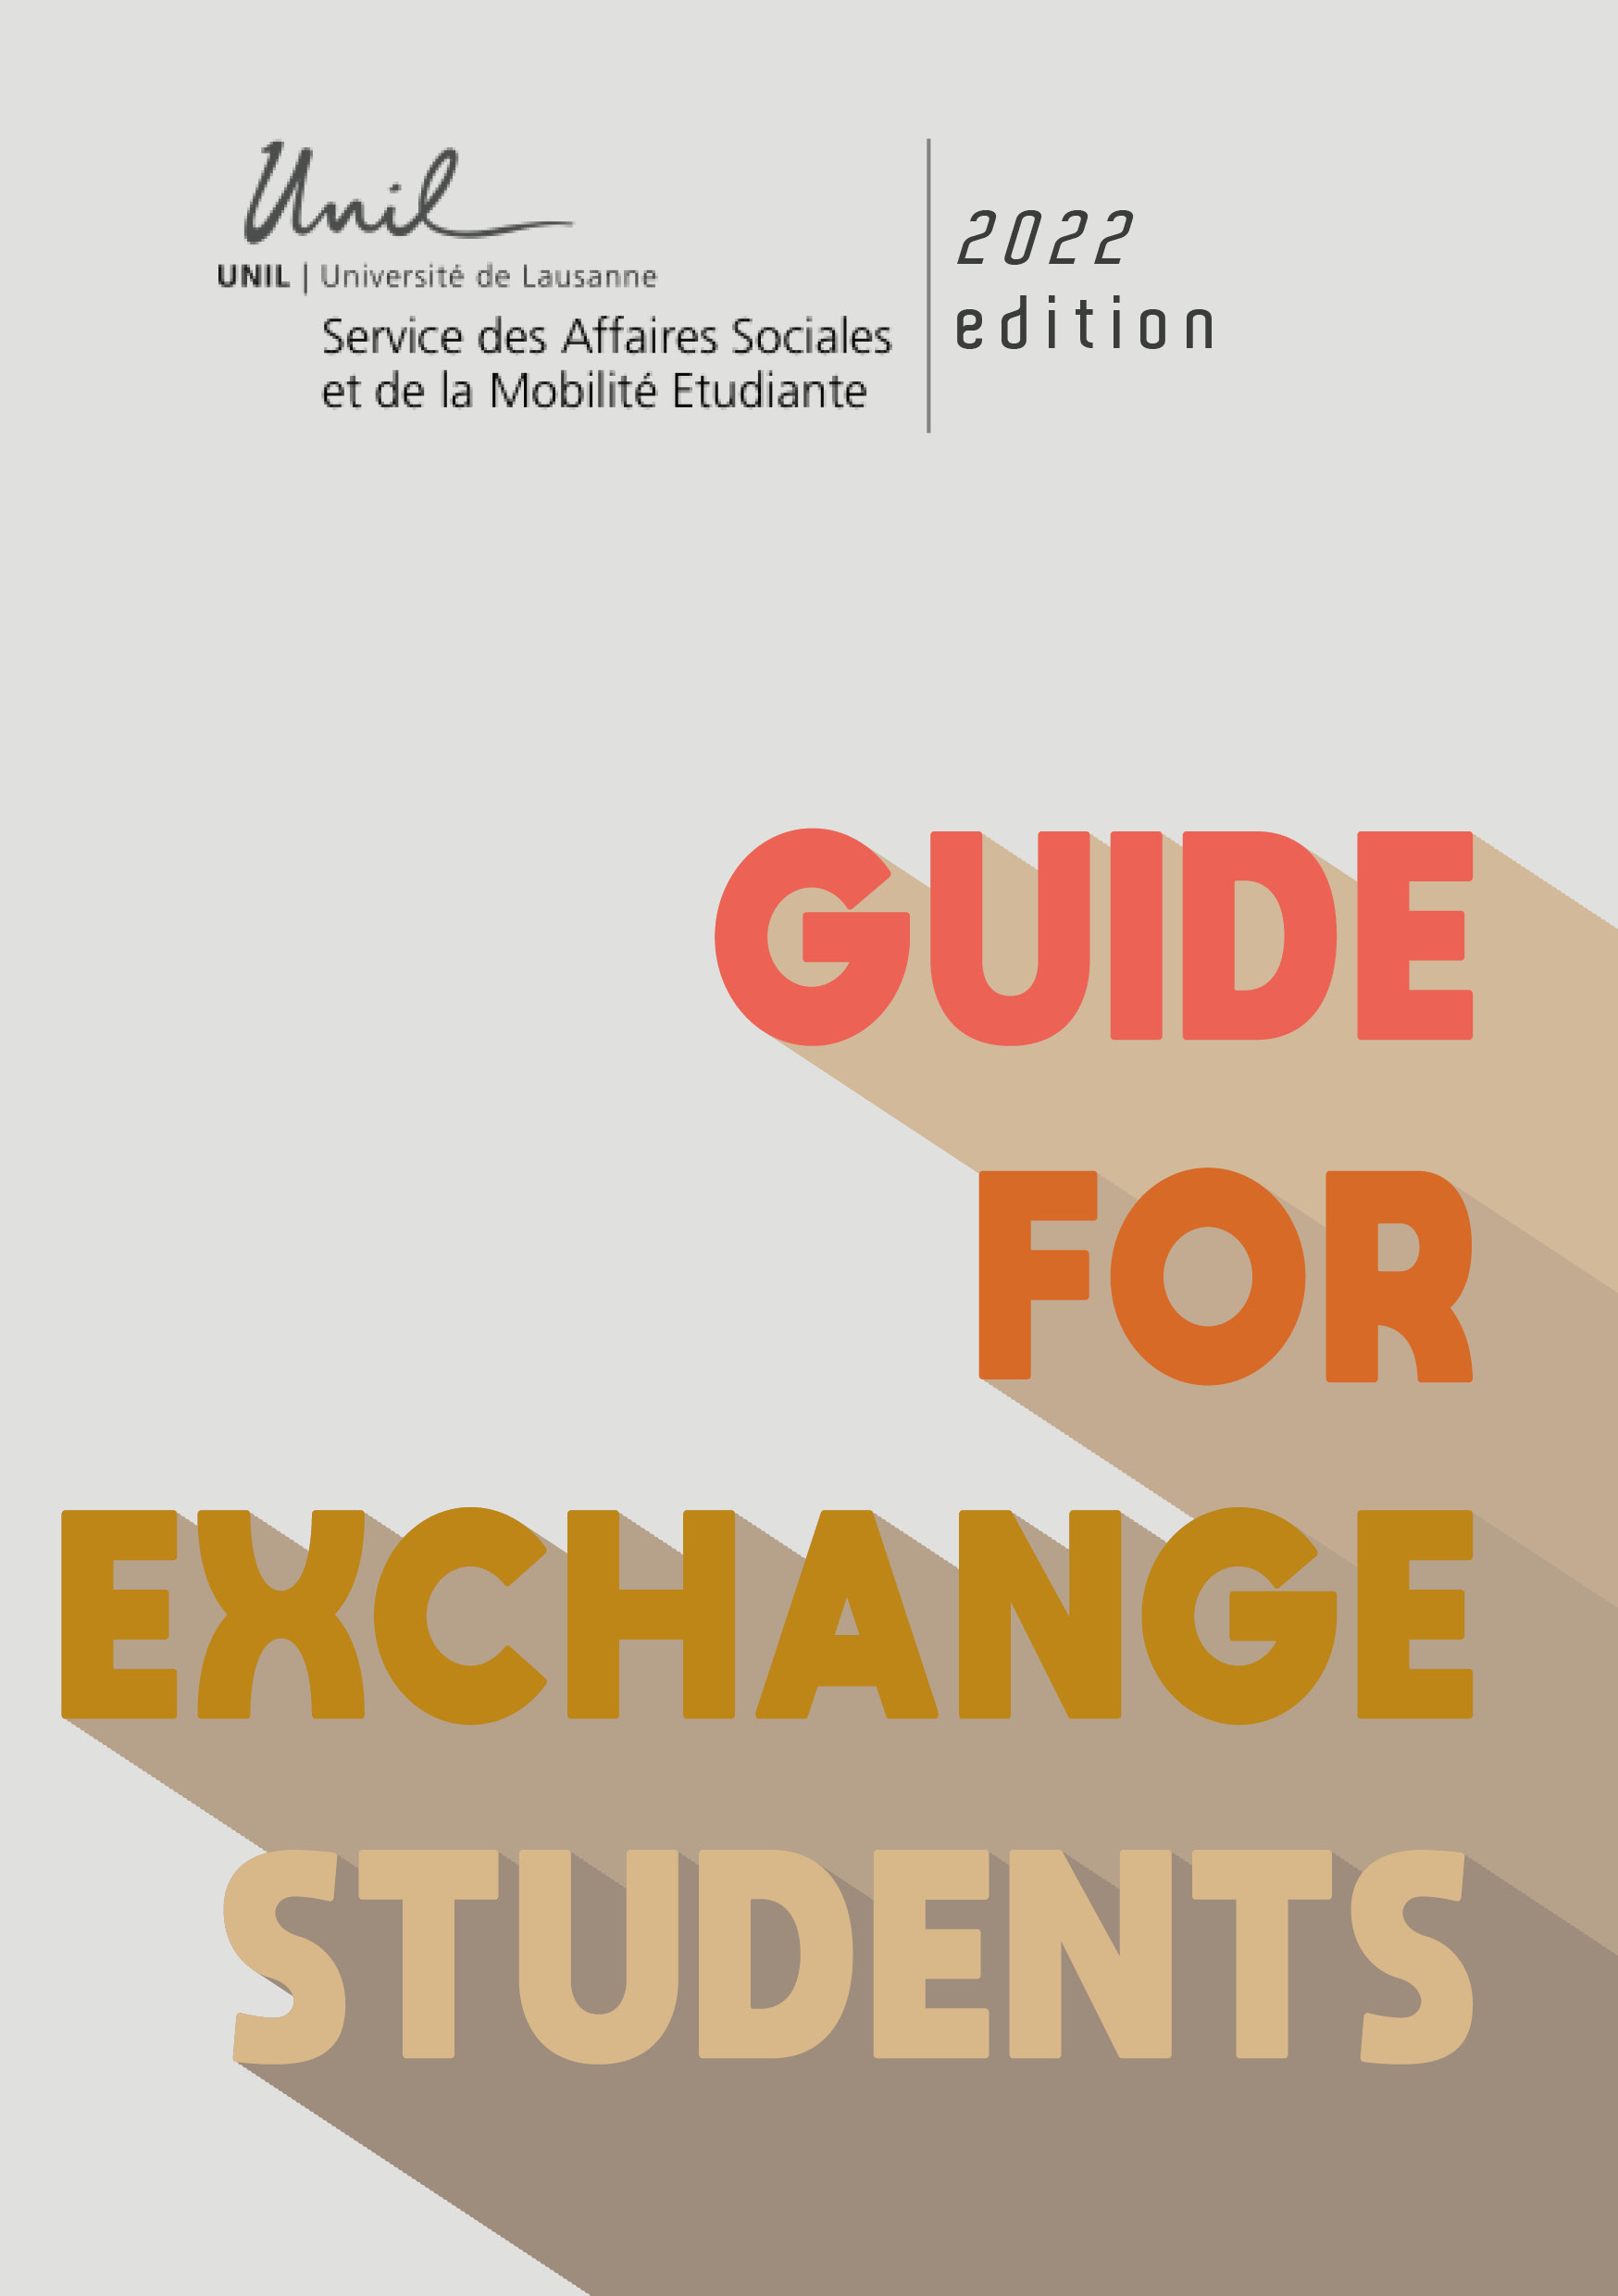 GUIDE FOR EXCHANGE STUDENT_2022.jpg